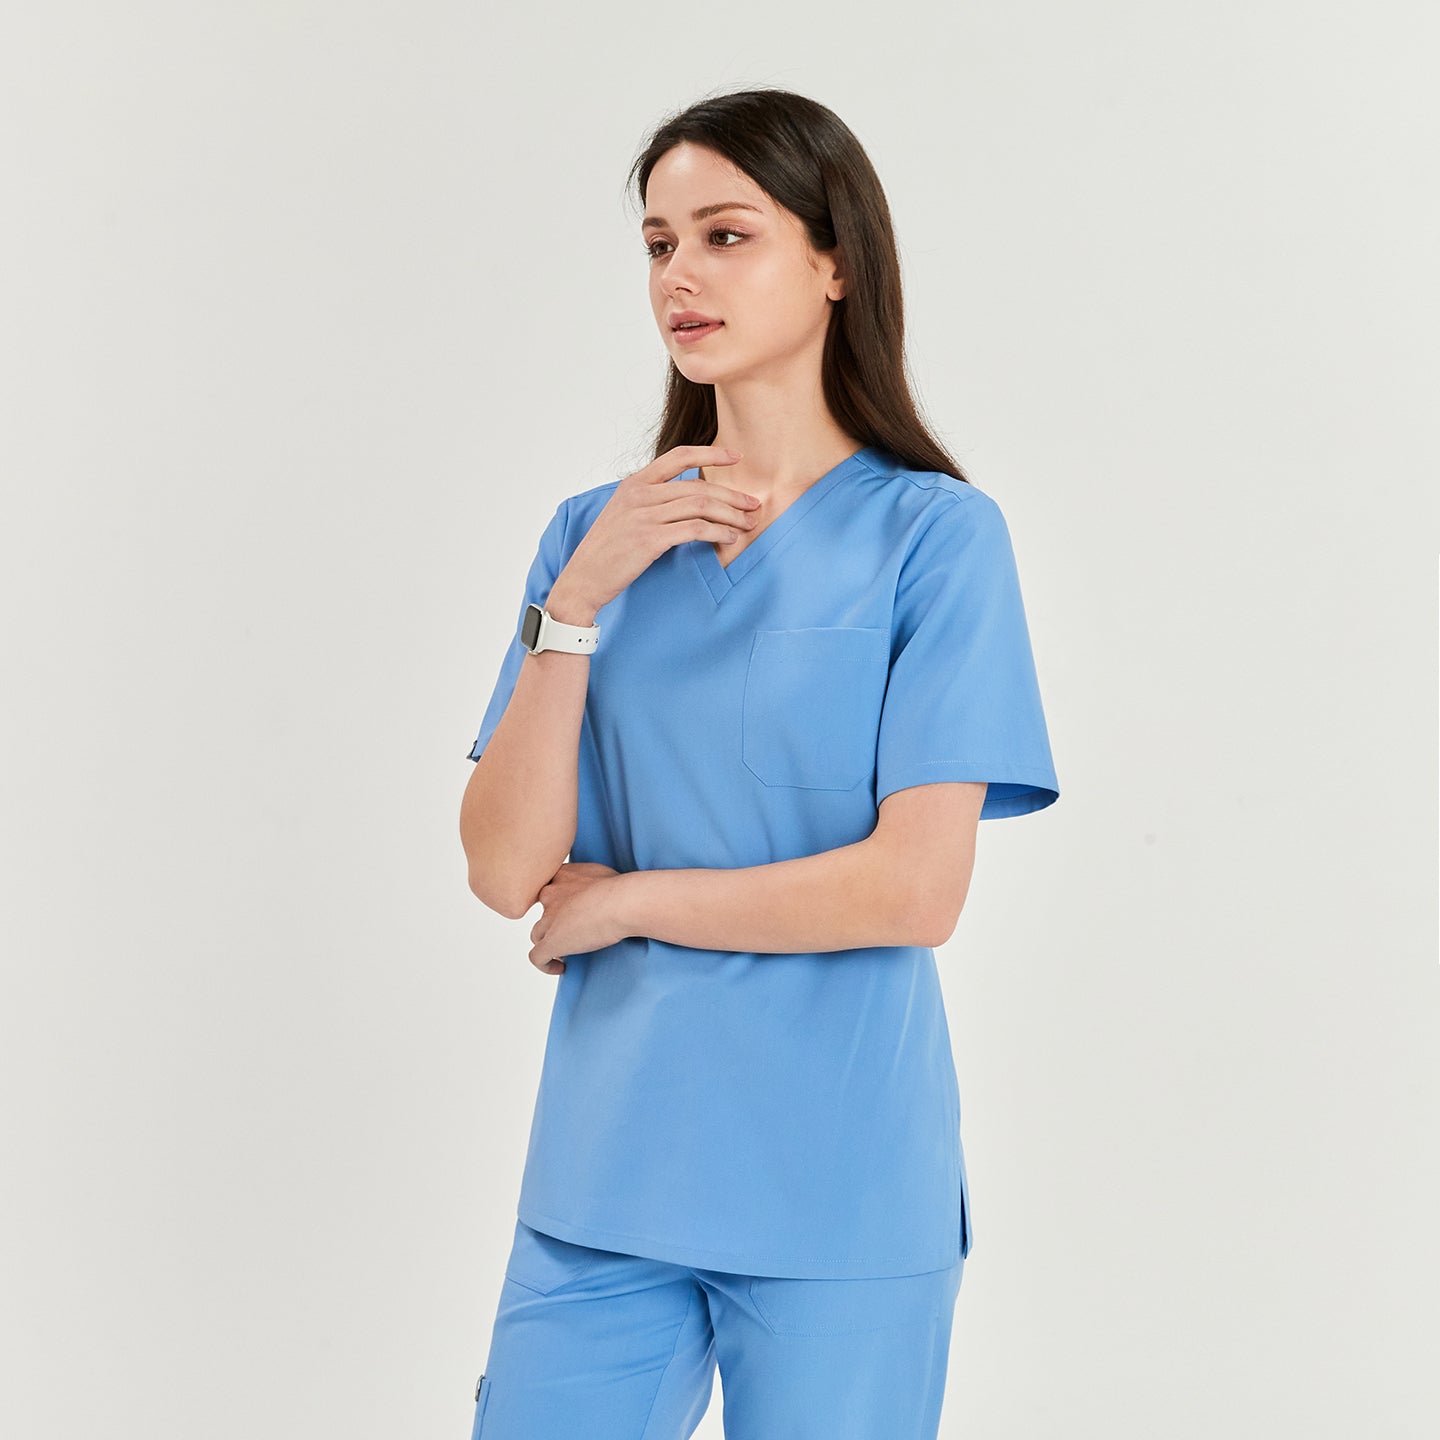  Woman wearing a V-neck scrub top and matching pants, standing with one hand touching her neck, looking to the side,Ceil Blue